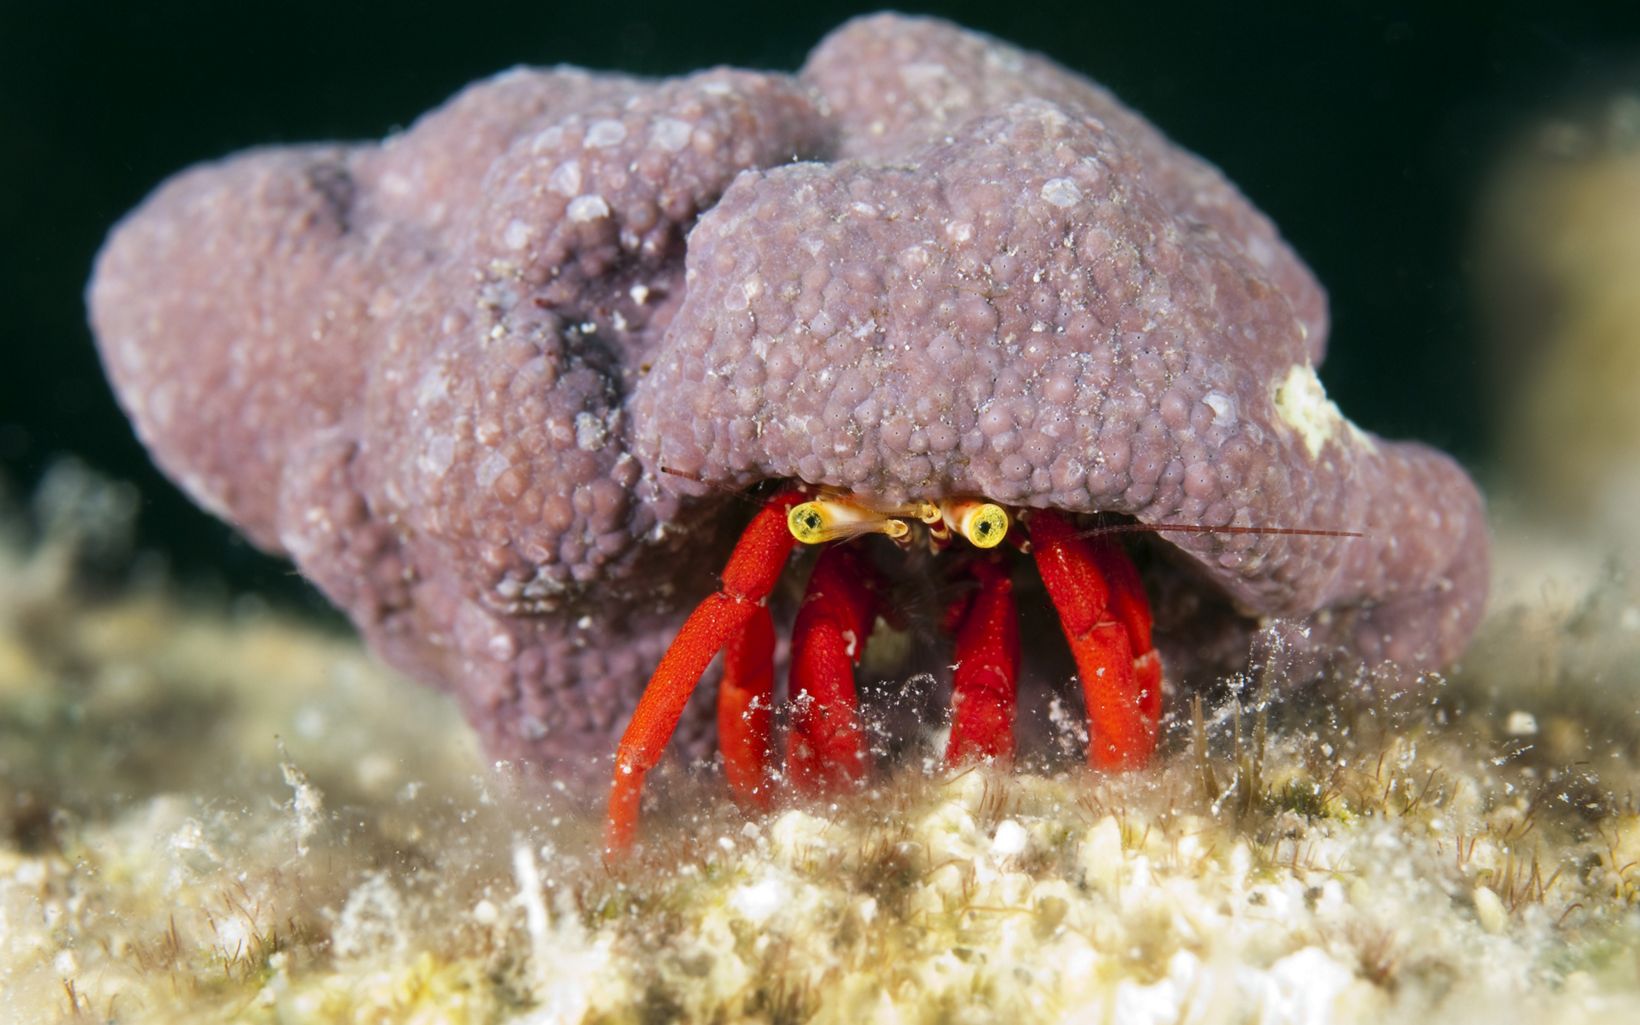 A red reef hermit crab photographed underwater at the Exuma Cays Land and Sea Park, Bahamas.